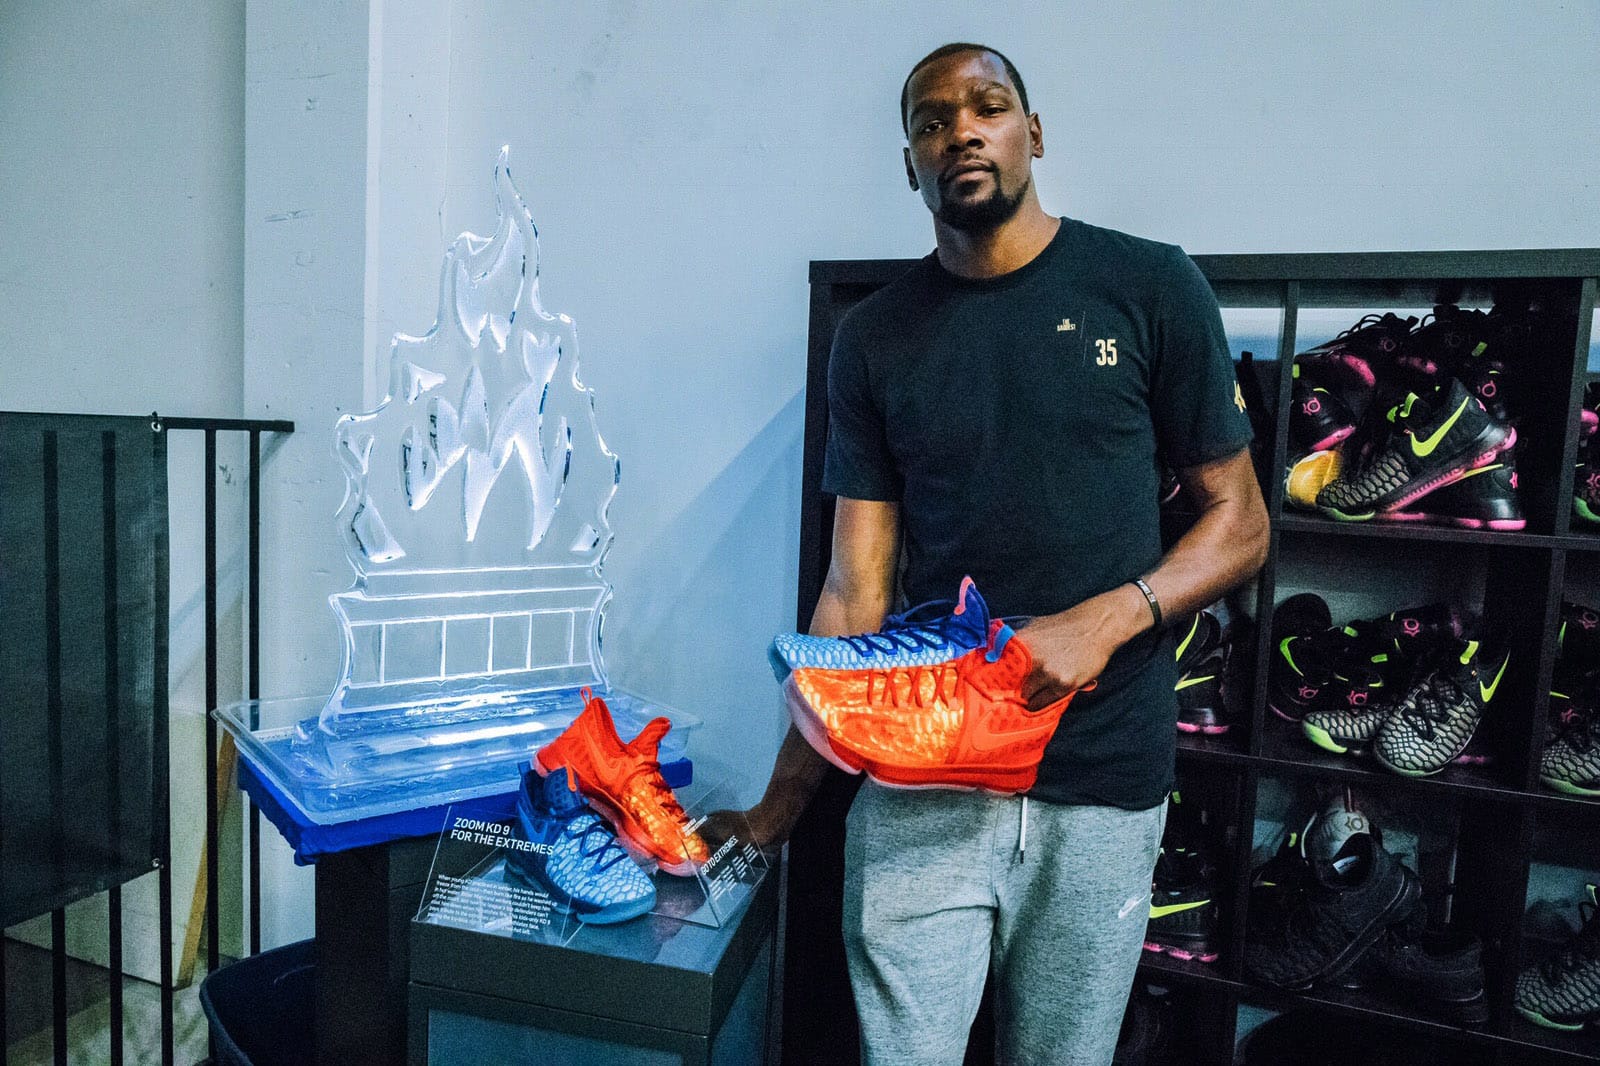 nike kd fire and ice